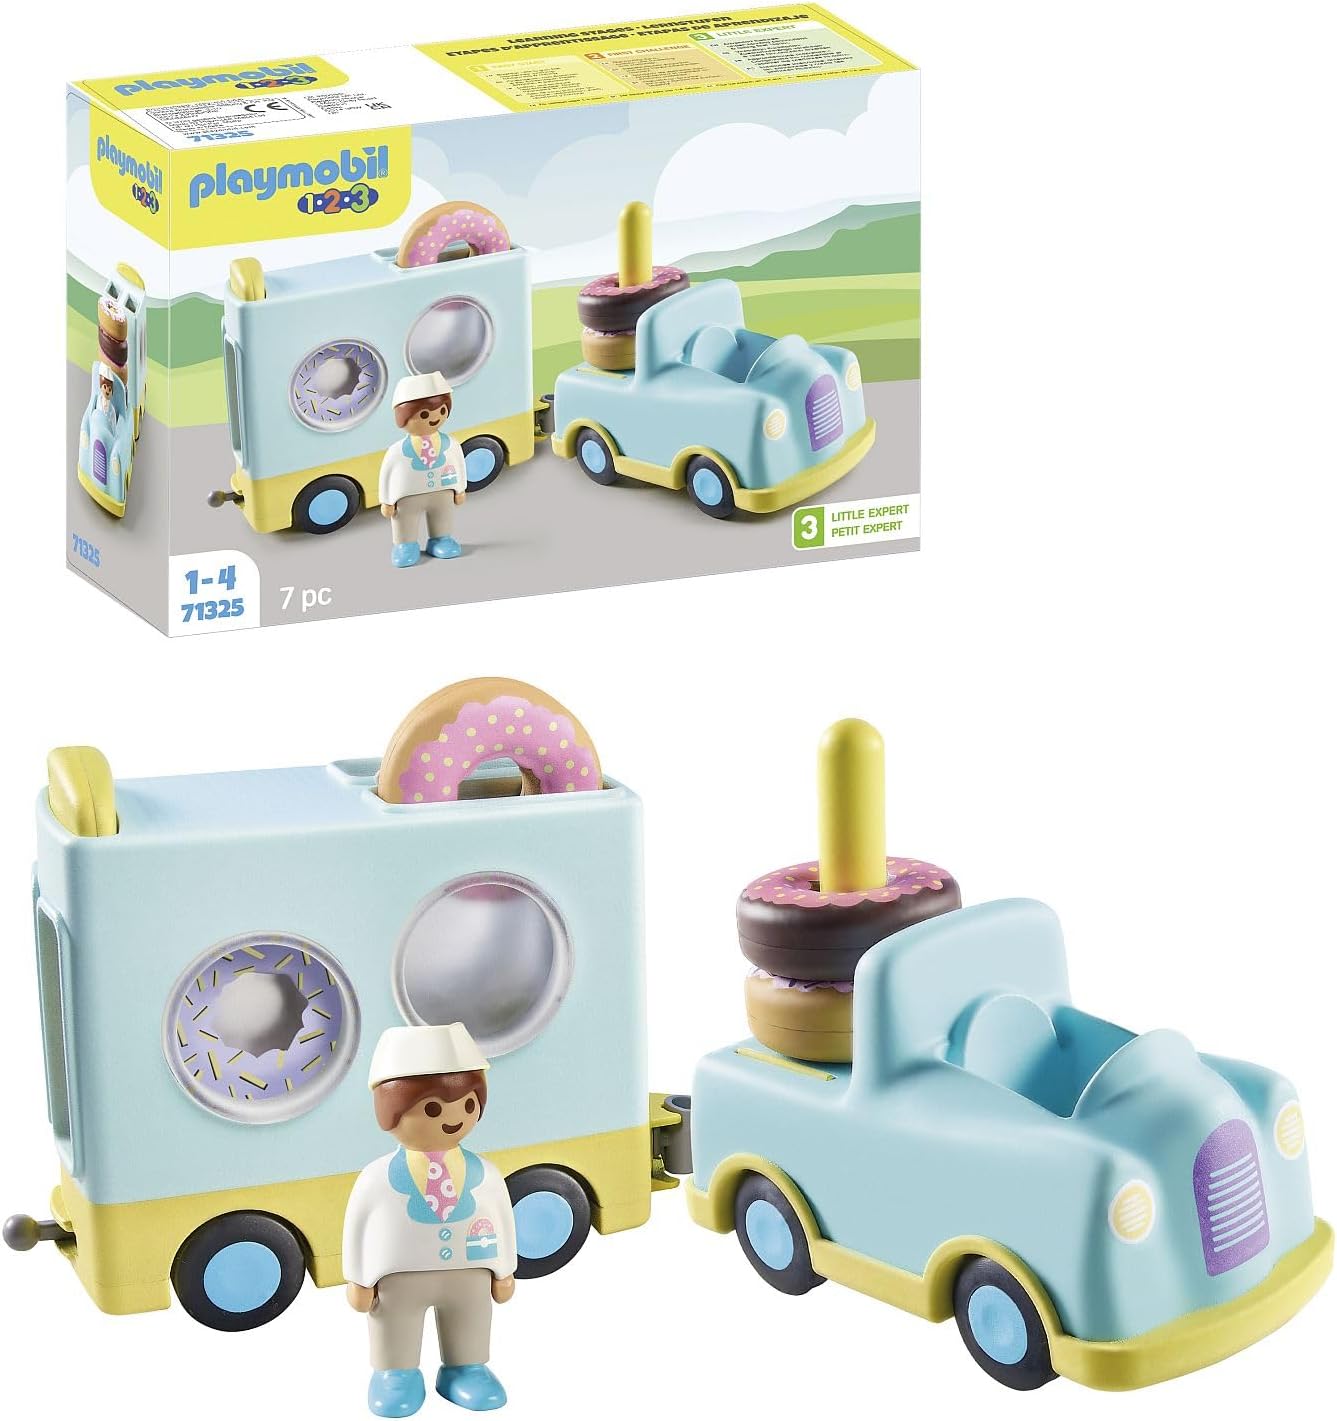 PLAYMOBIL 1.2.3: 71325 Crazy Donut Truck with Stacking and Sorting Function, Educational Toy for Toddlers, Toy for Children from 12 Months